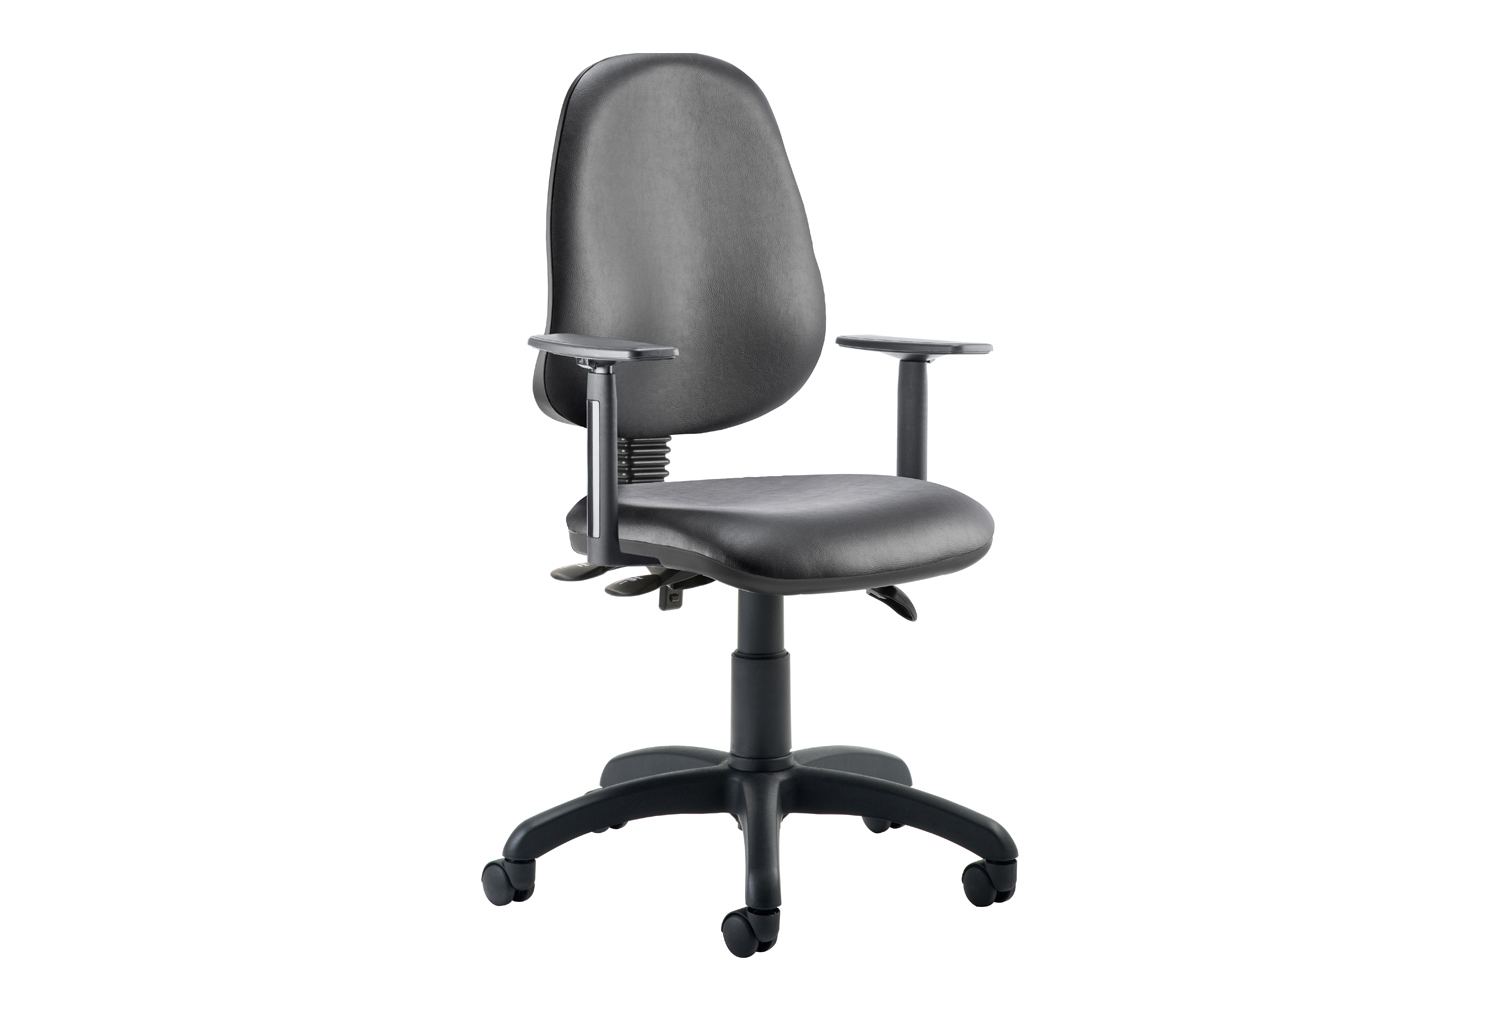 Lunar Plus 3 Lever Vinyl Operator Office Chair With Adjustable Arms, Black, Fully Installed